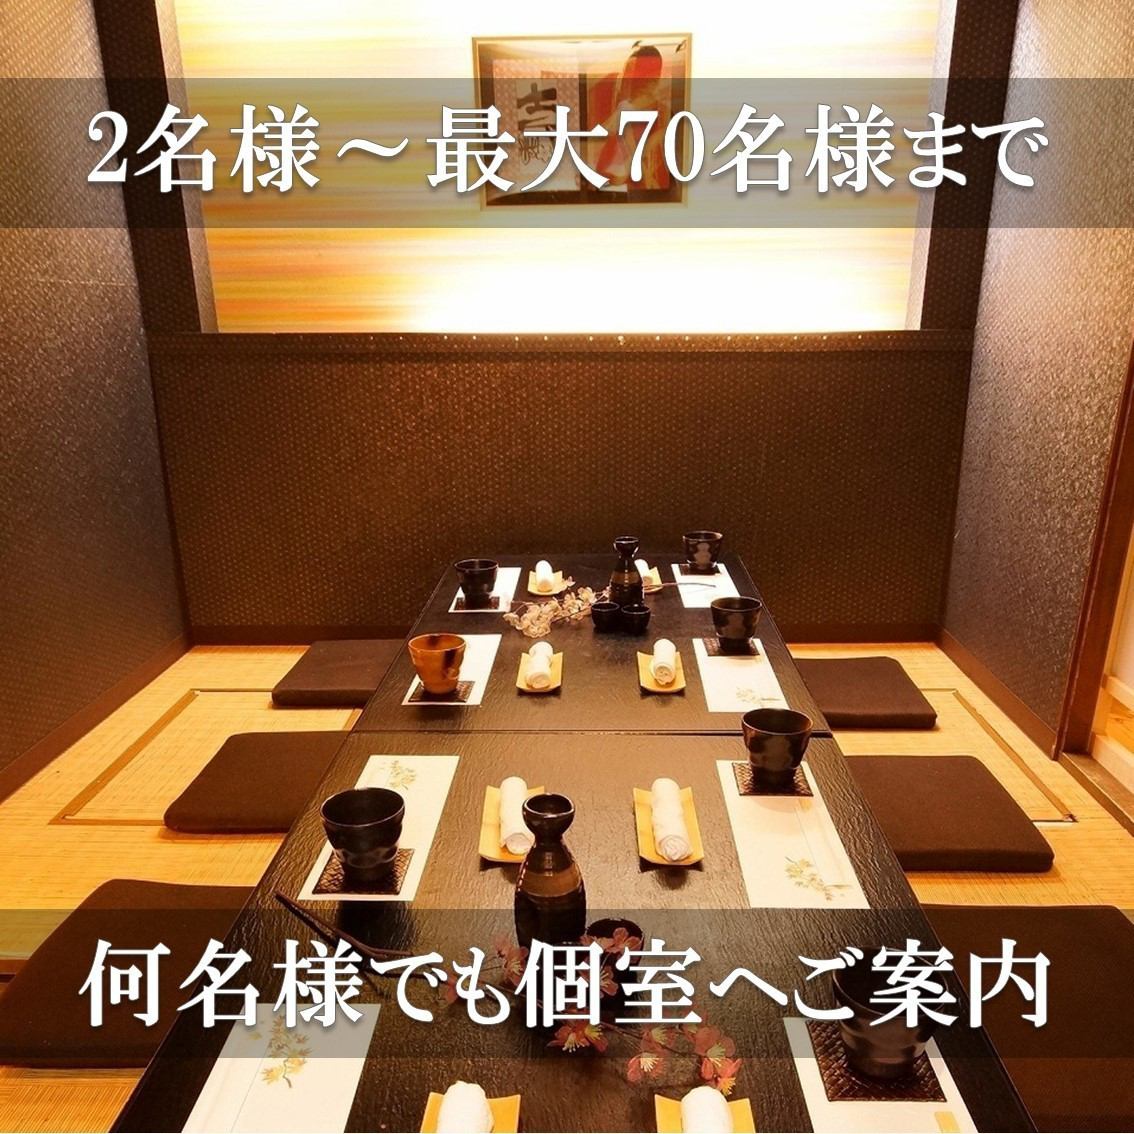 [Completely private room/Horigotatsu seating] We will provide spaced seating.